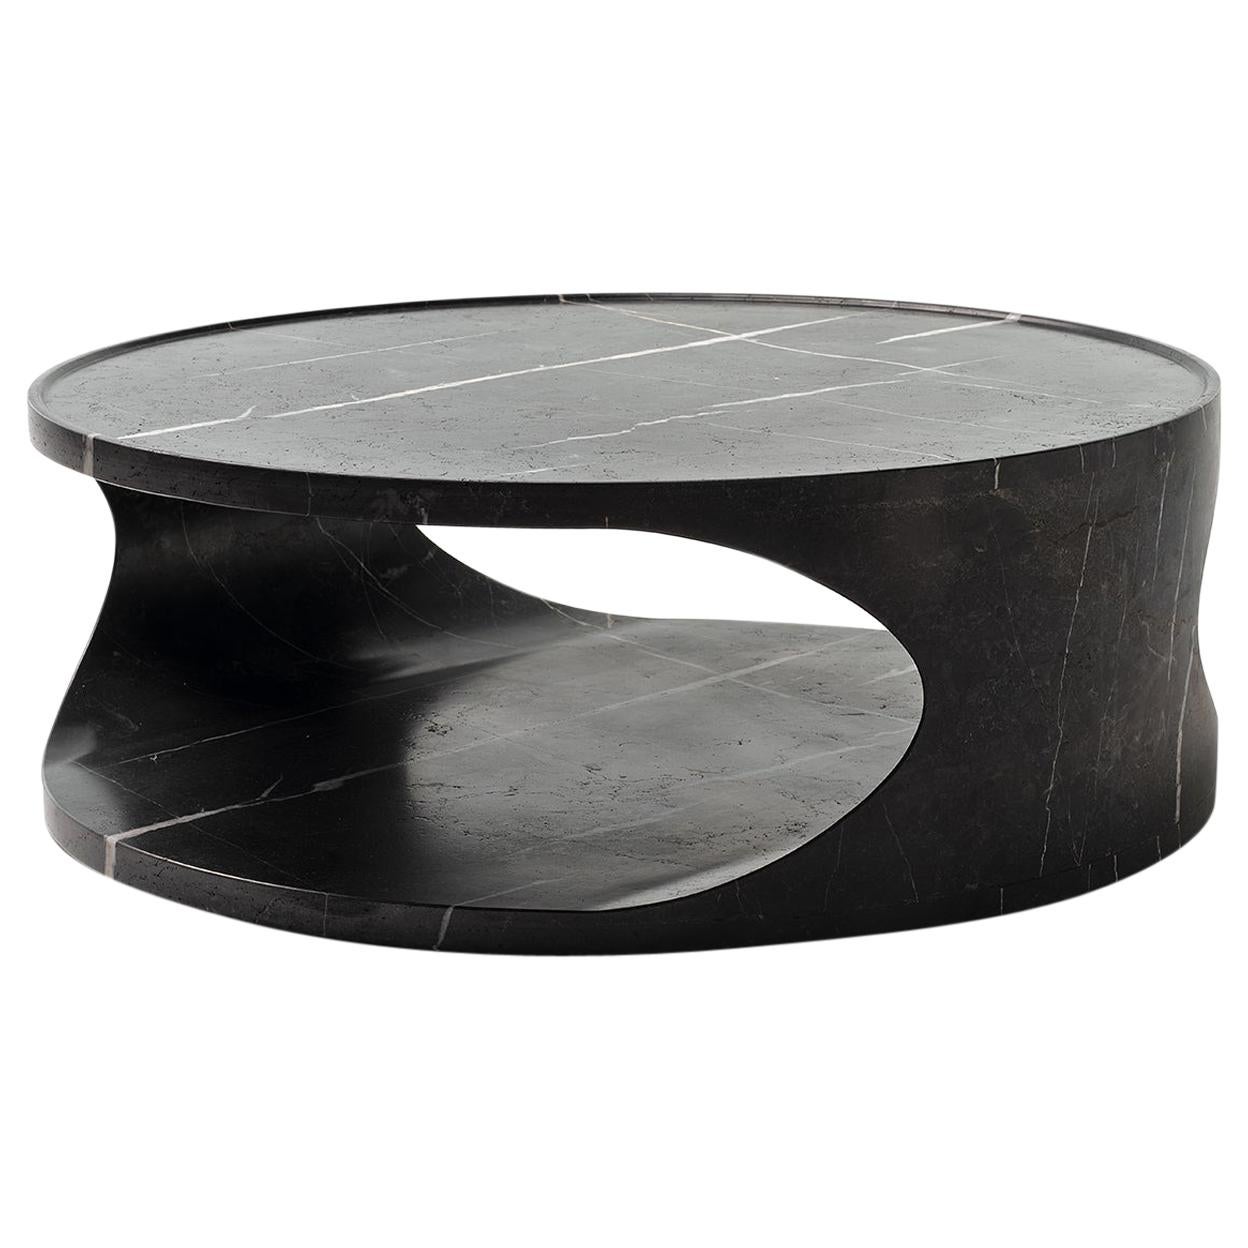 21st Century Modern Sculptural Carrara Marble Coffee Table Carved From Block